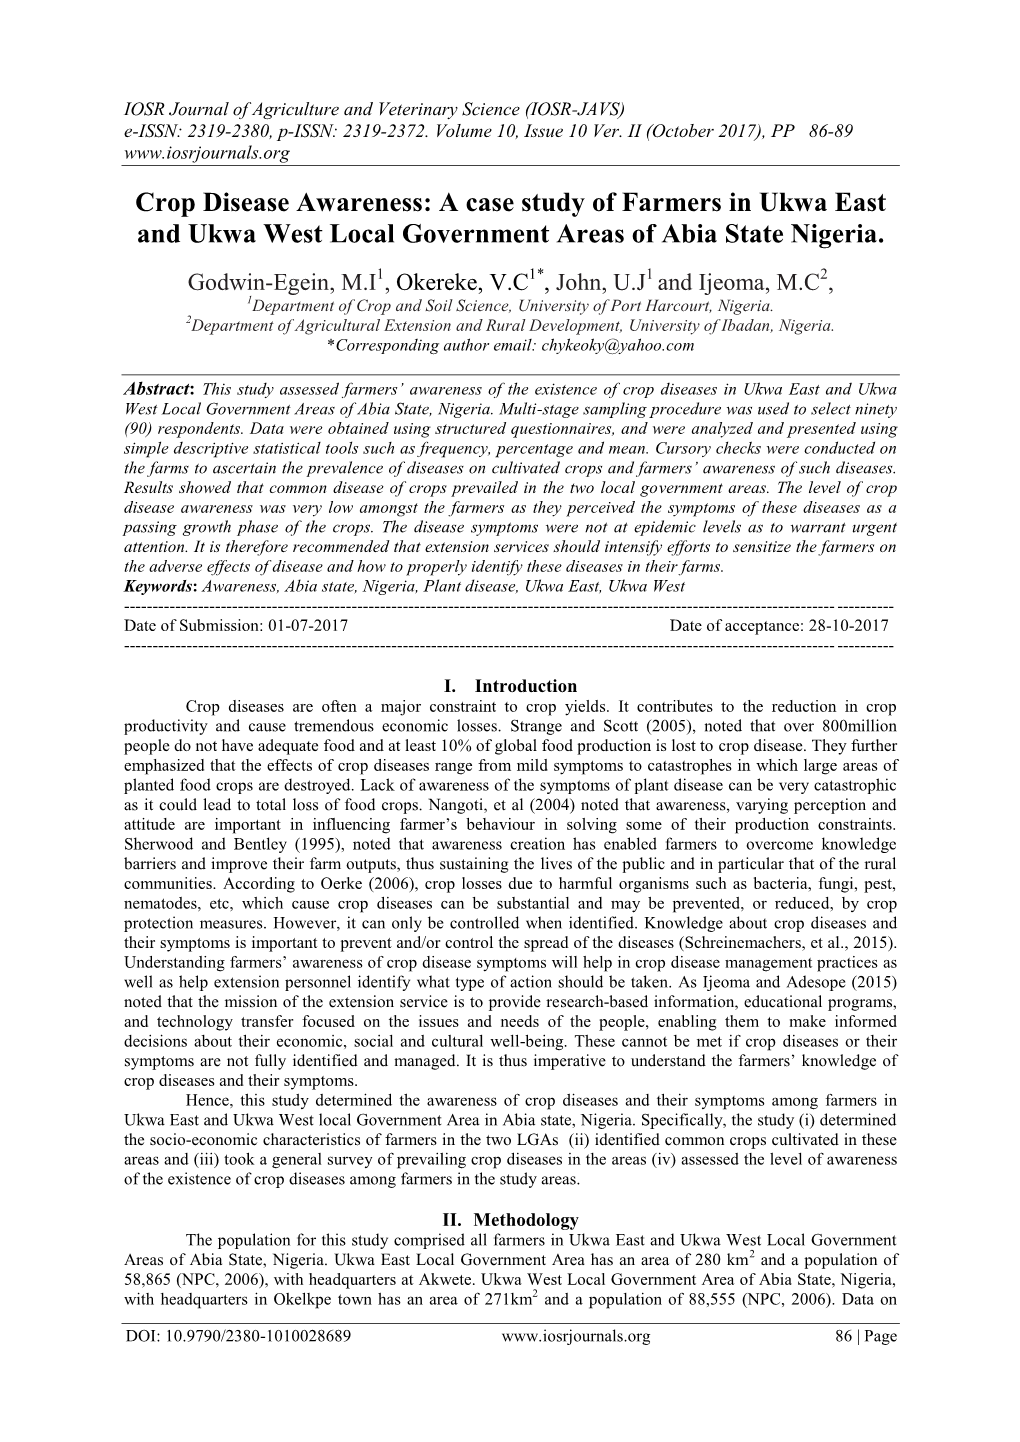 Crop Disease Awareness: a Case Study of Farmers in Ukwa East and Ukwa West Local Government Areas of Abia State Nigeria